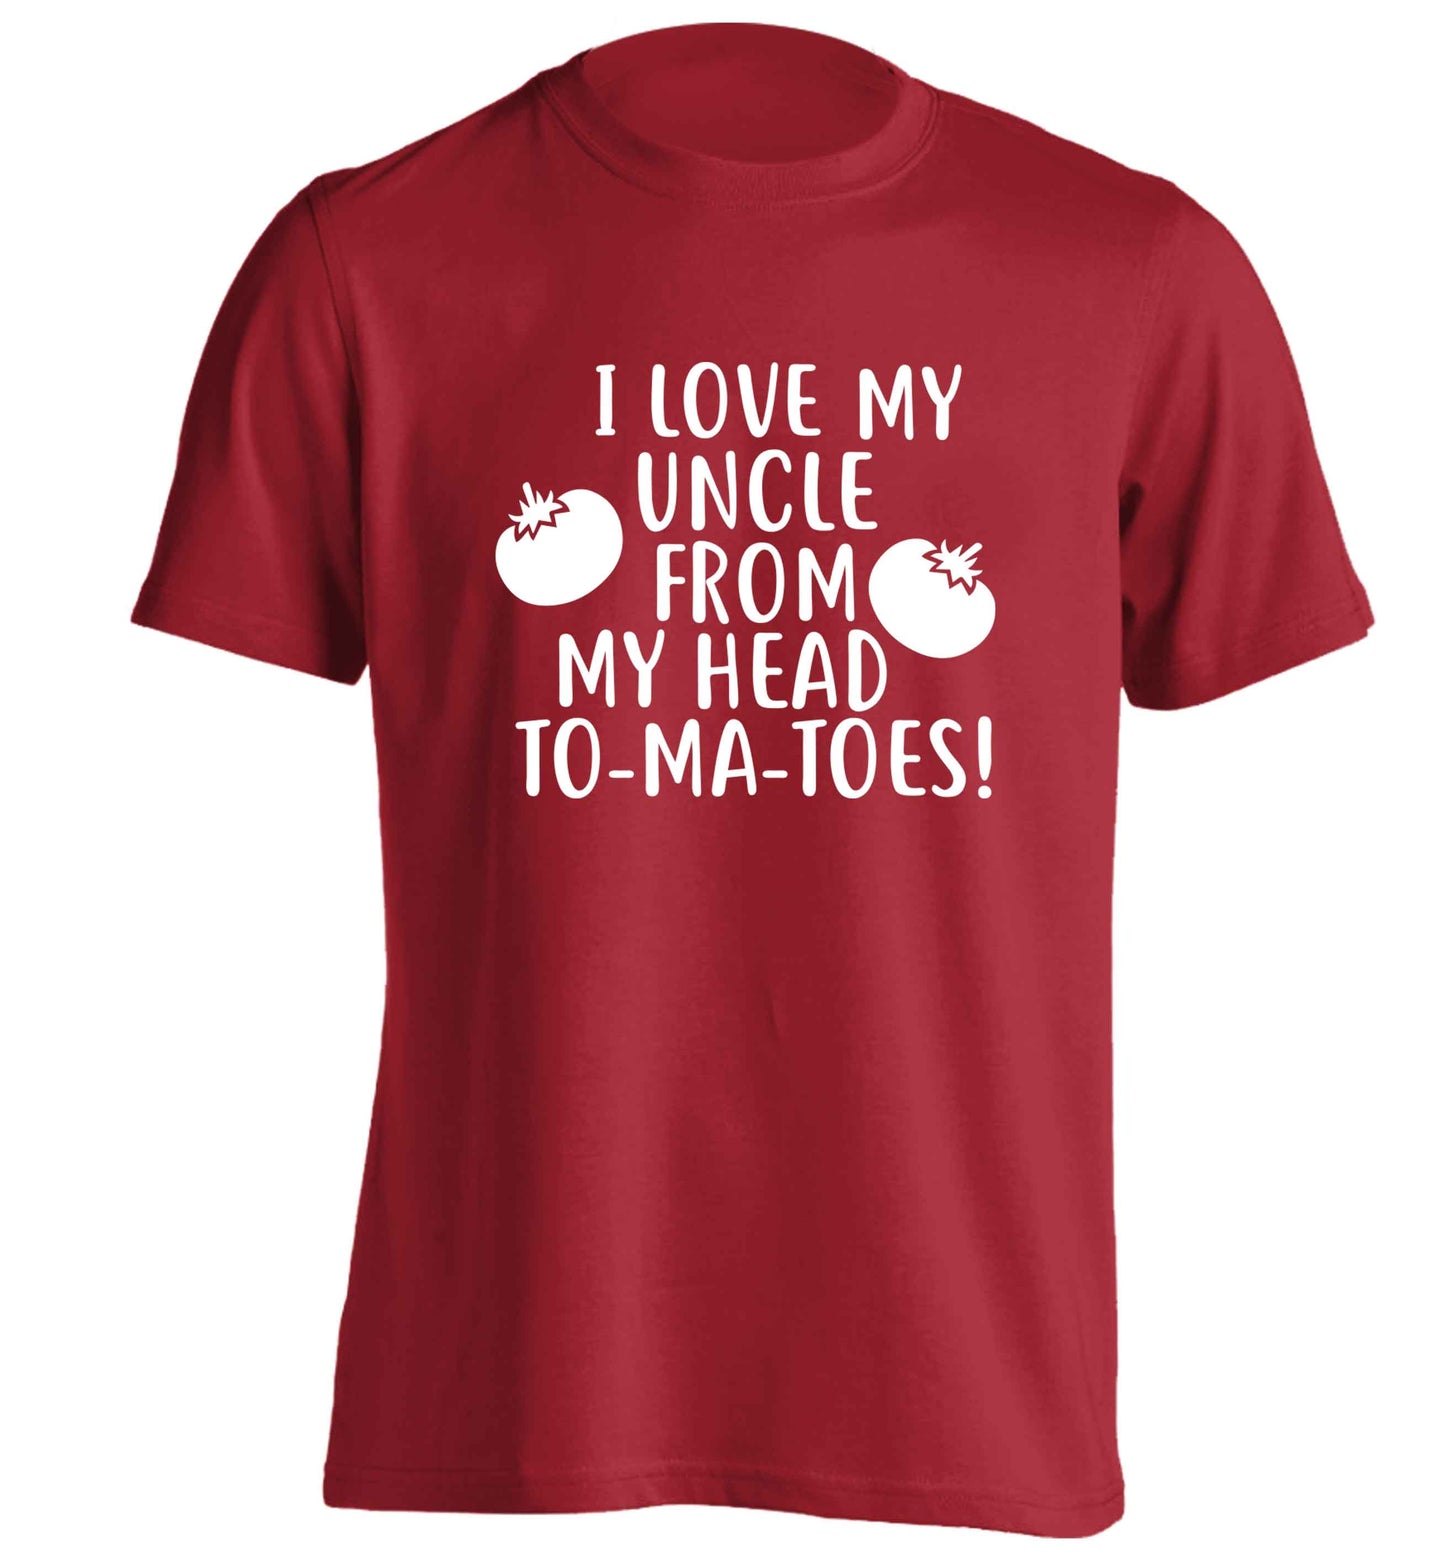 I love my uncle from my head To-Ma-Toes adults unisex red Tshirt 2XL